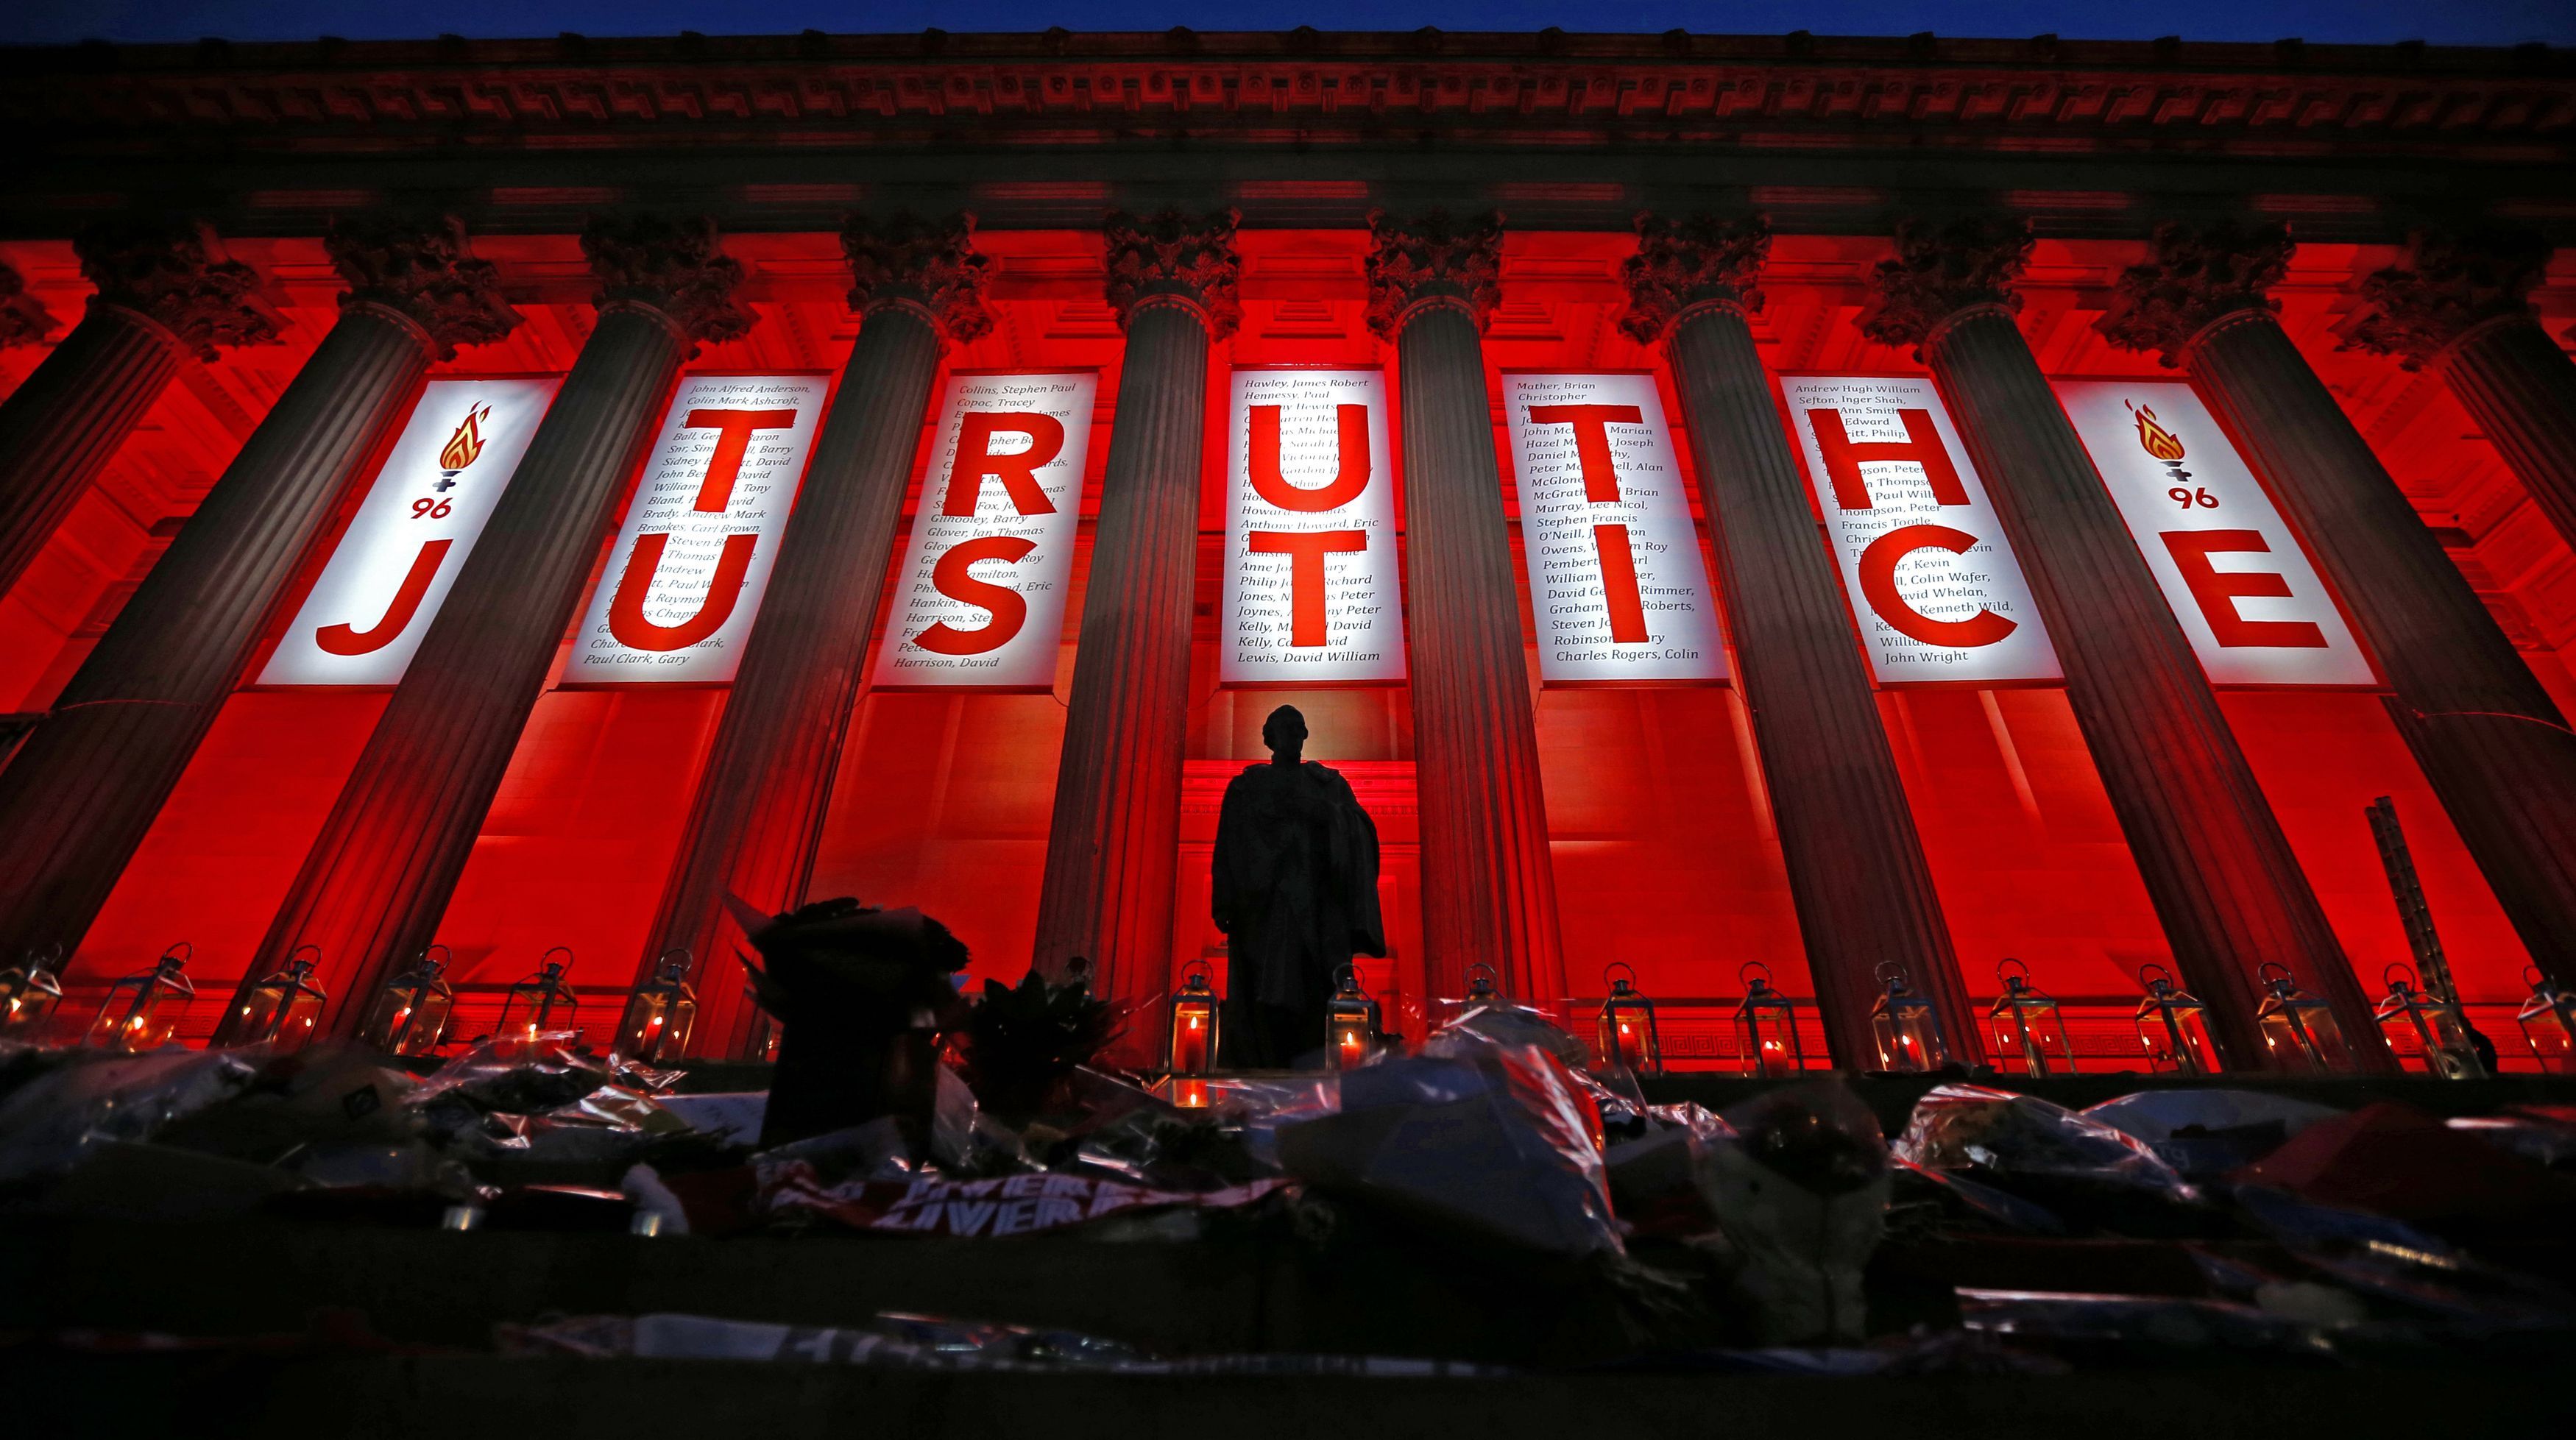 St George's Hall in Liverpool is illuminated following a special commemorative service to mark the outcome of the Hillsborough inquest, which ruled that 96 Liverpool fans who died as a result of the Hillsborough disaster were unlawfully killed.